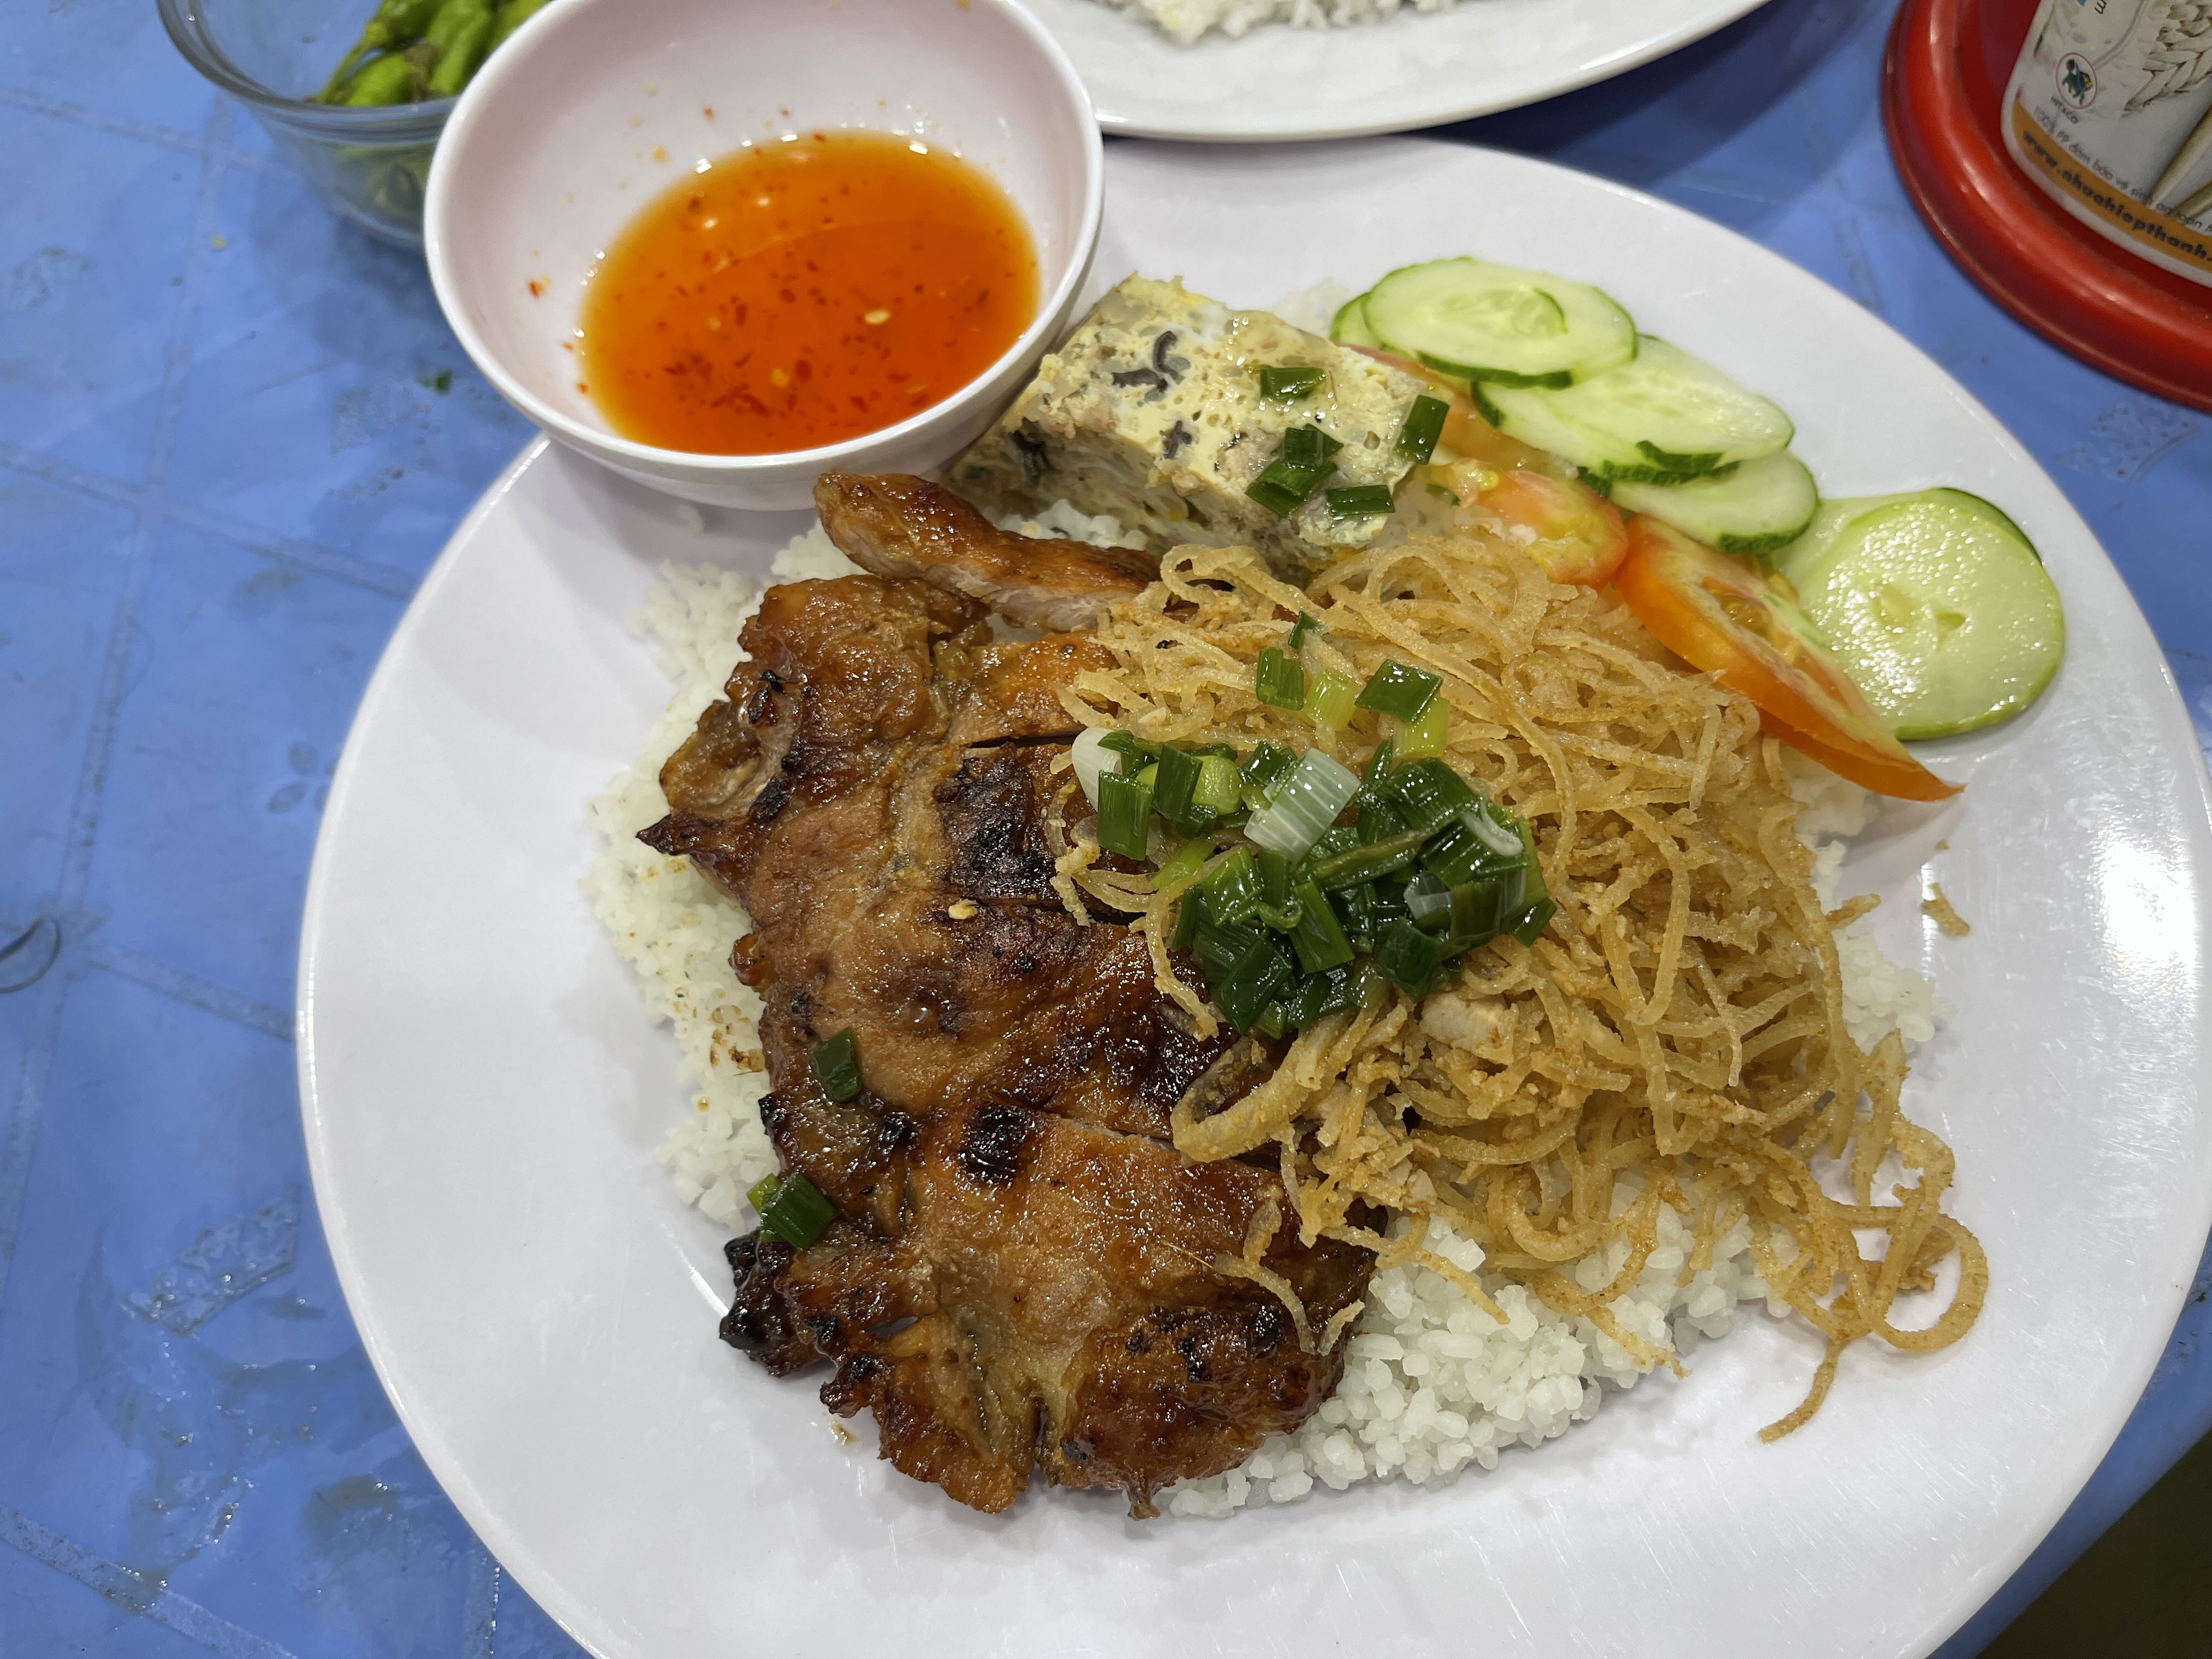 A dish of 'com tam' (broken rice topped with grilled ribs and shredded pork skin) is served at a local 'quán' (food stall) in District 12, Ho Chi Minh City. Photo: Dong Nguyen / Tuoi Tre News